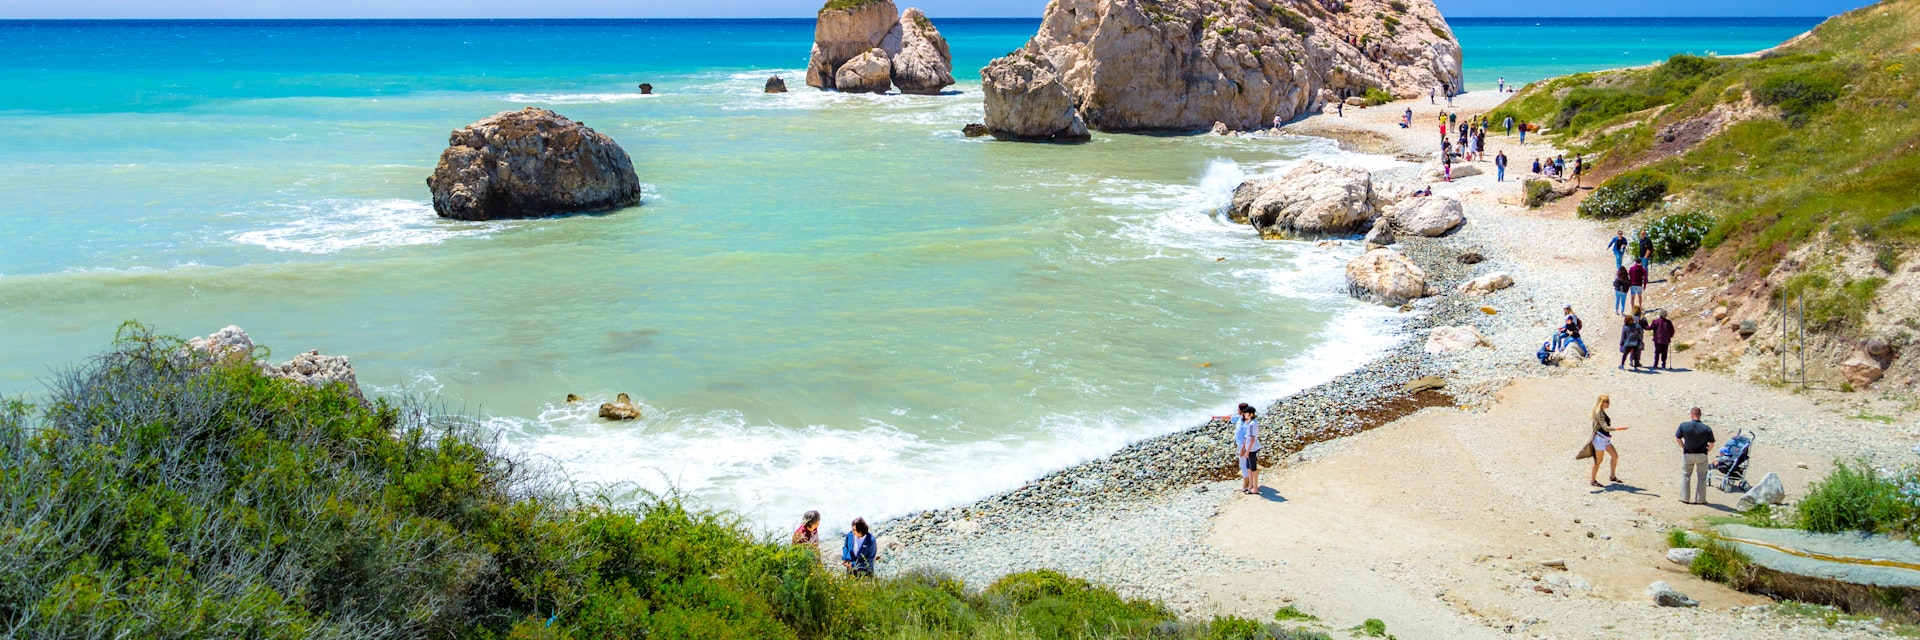 The famous beach of Aphrodite's rock, Cyprus.